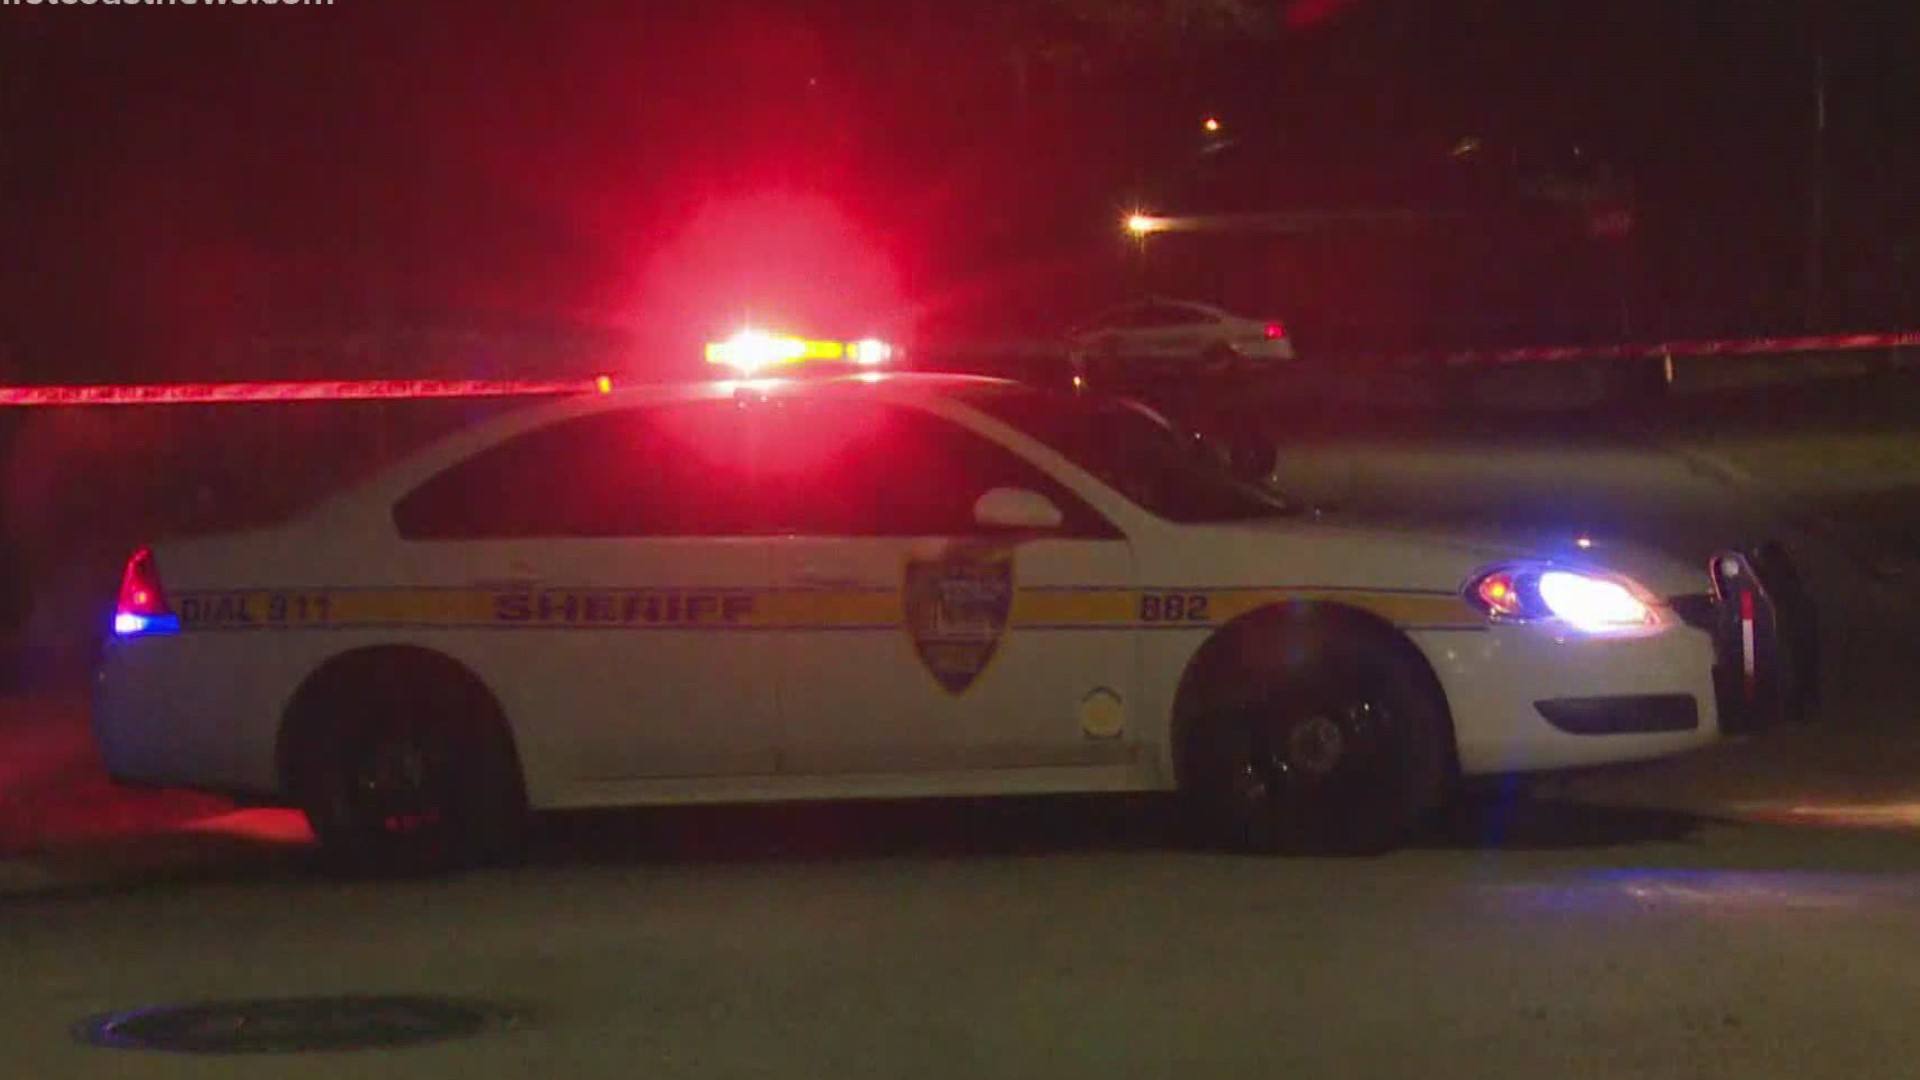 According to the JSO, the shooting happened in the 1800 block of McMillan Street.